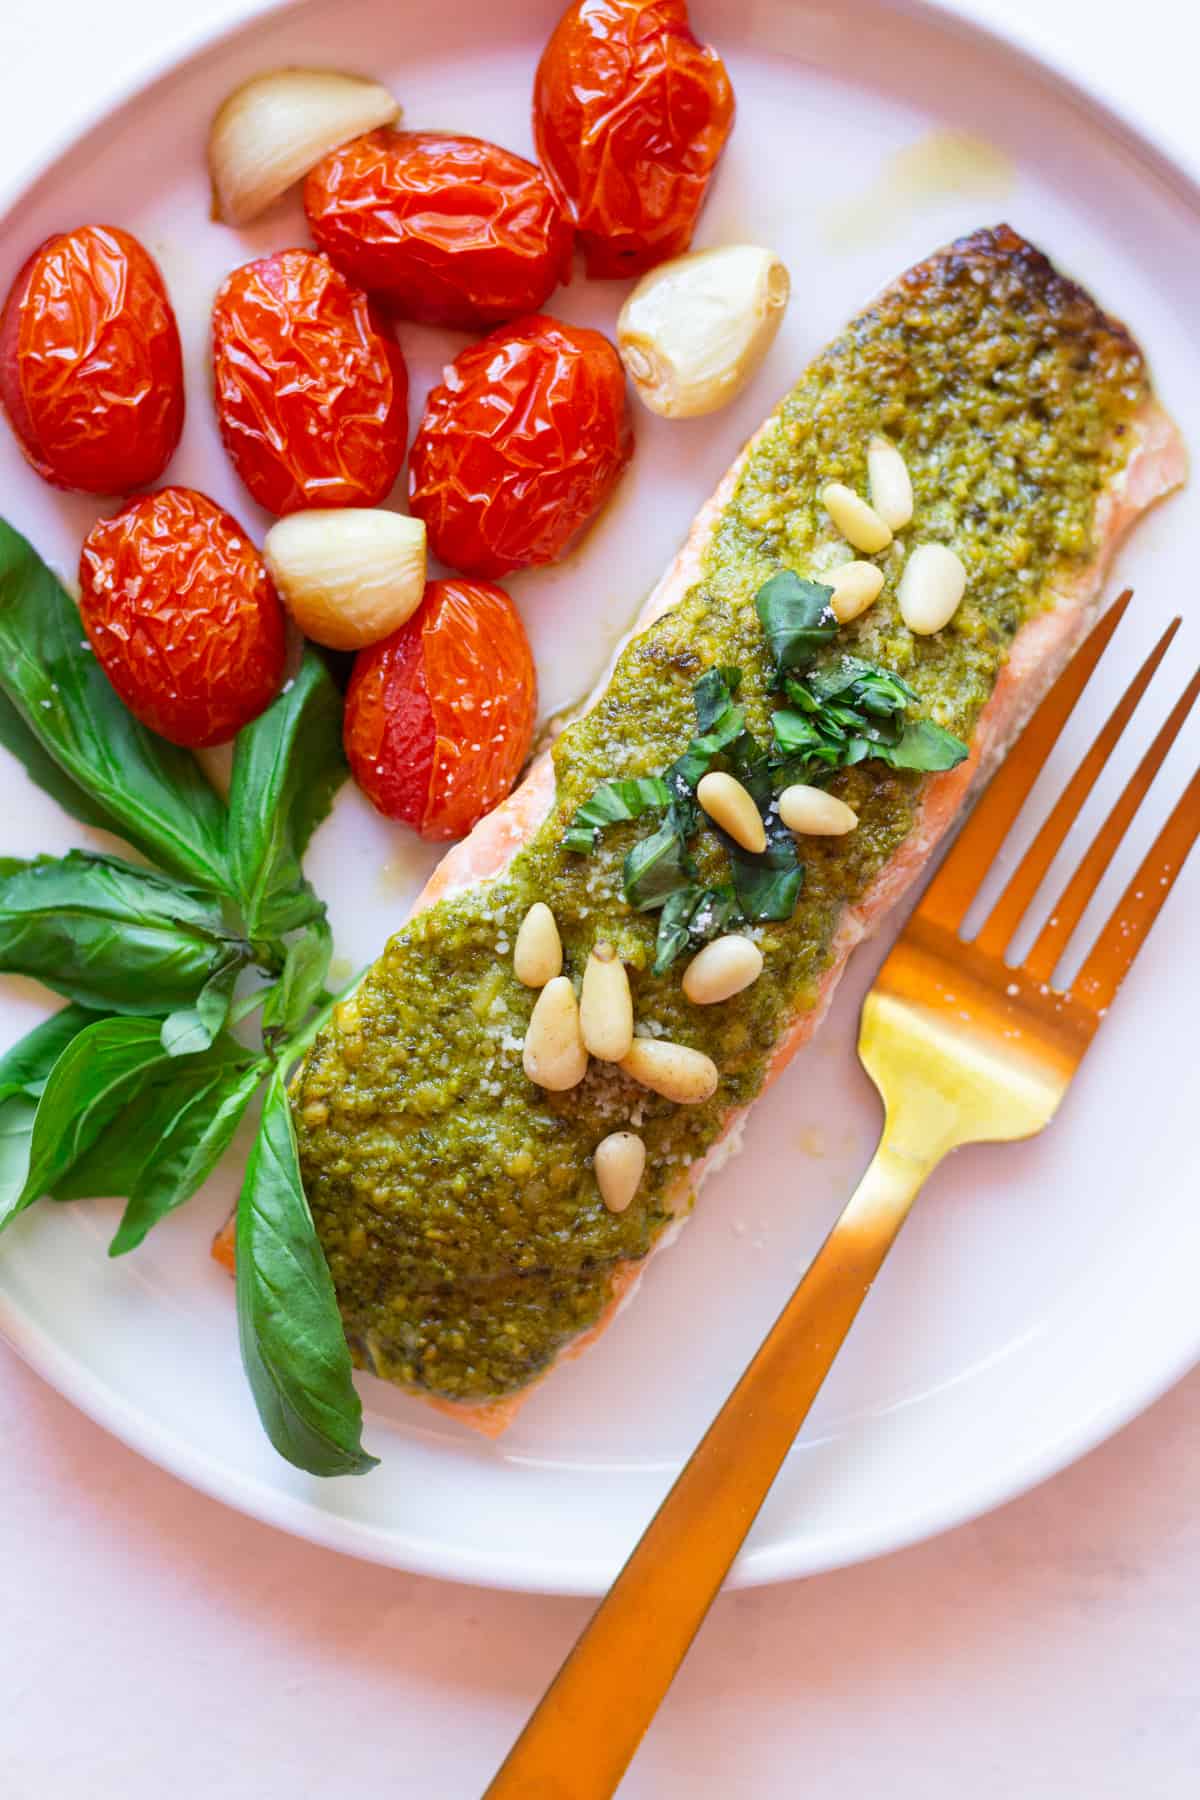 Here is an easy baked pesto salmon recipe that even picky eaters will love! Have dinner on the table within 25 minutes using this simple yet delicious recipe.